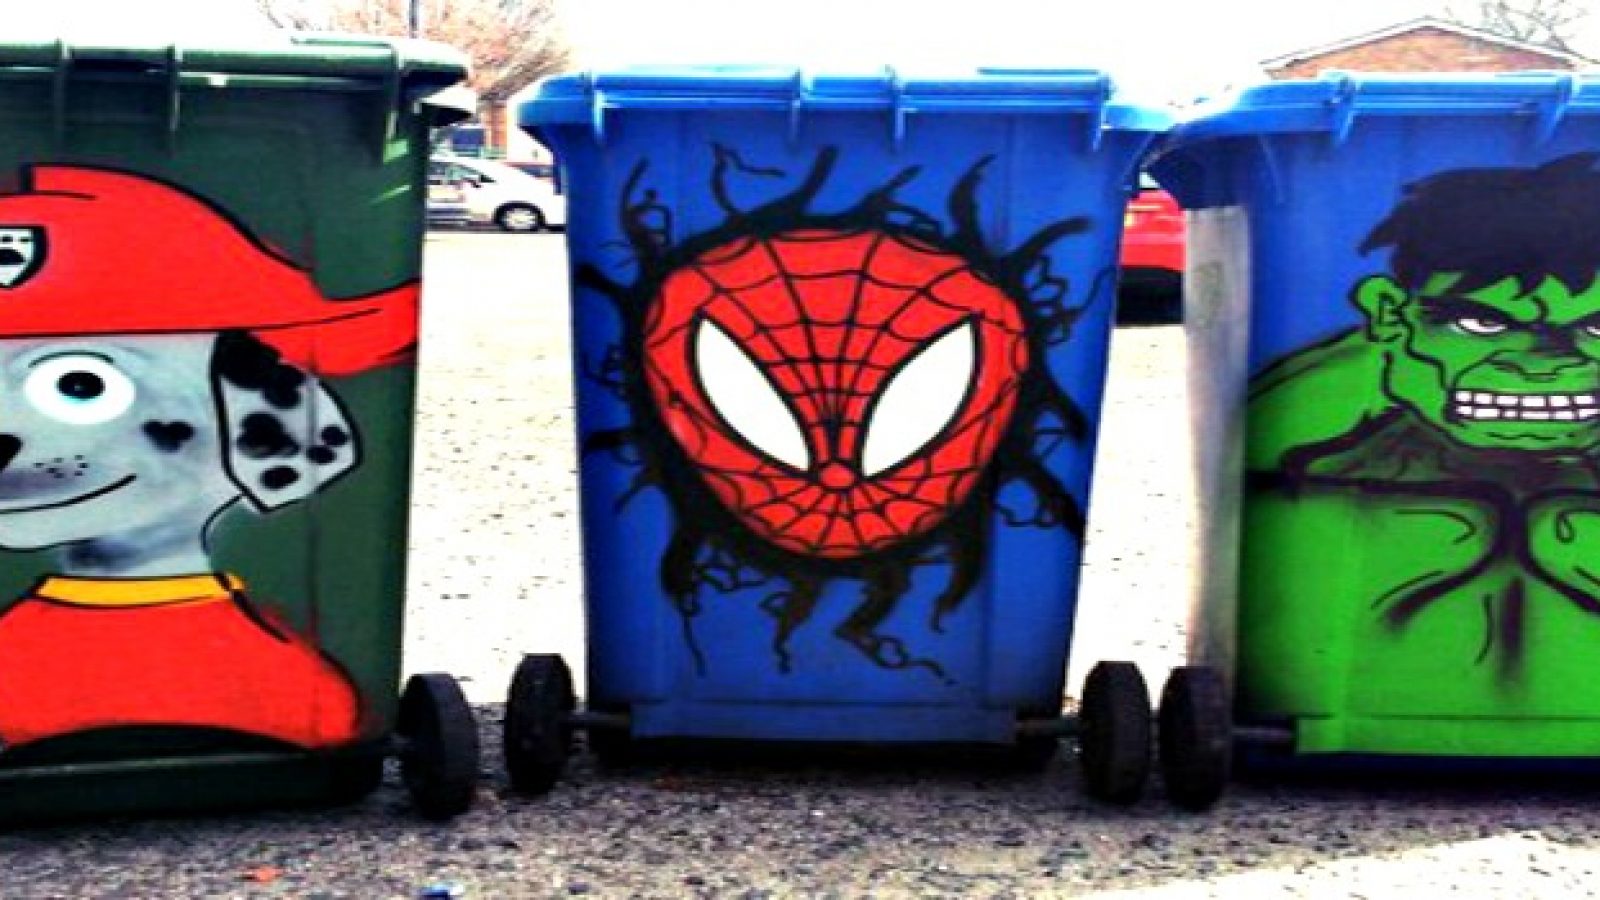 You'll never mix up your bin again!